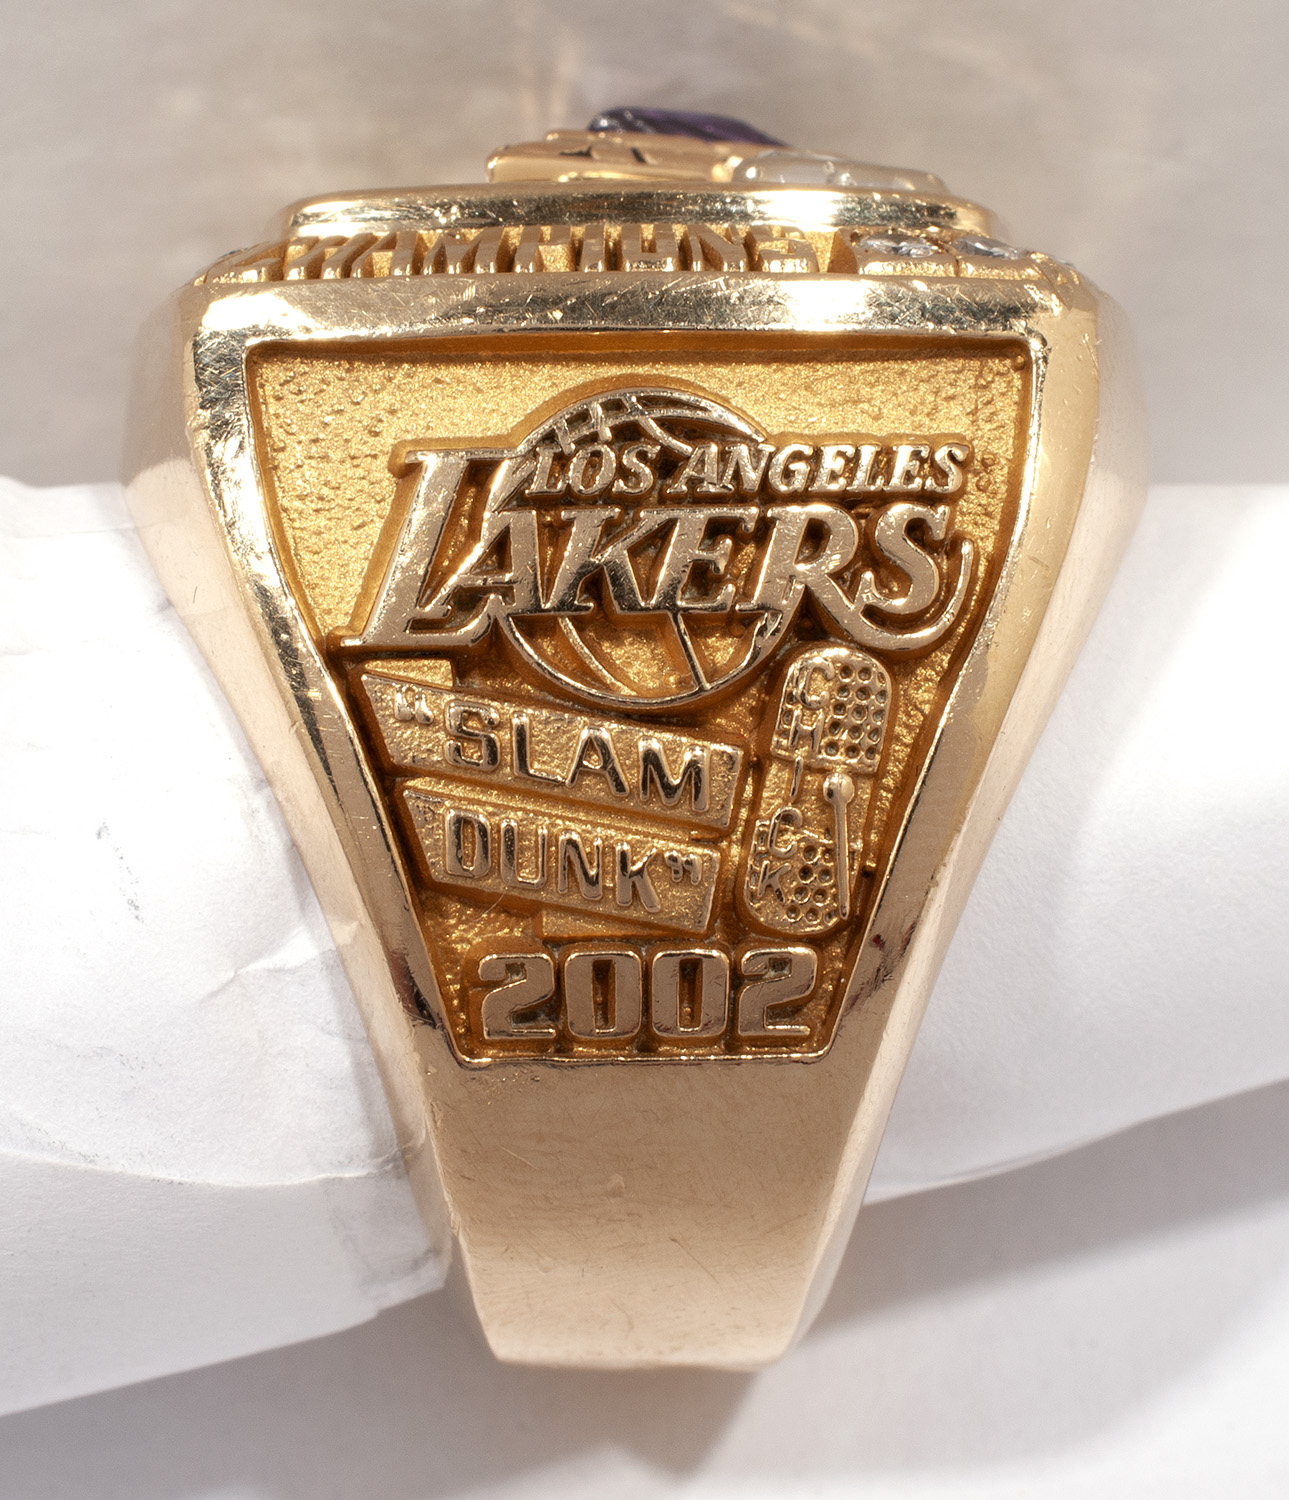 2002 Lakers 3-Peat Kobe, and Shaq Large – The Recycling Plant